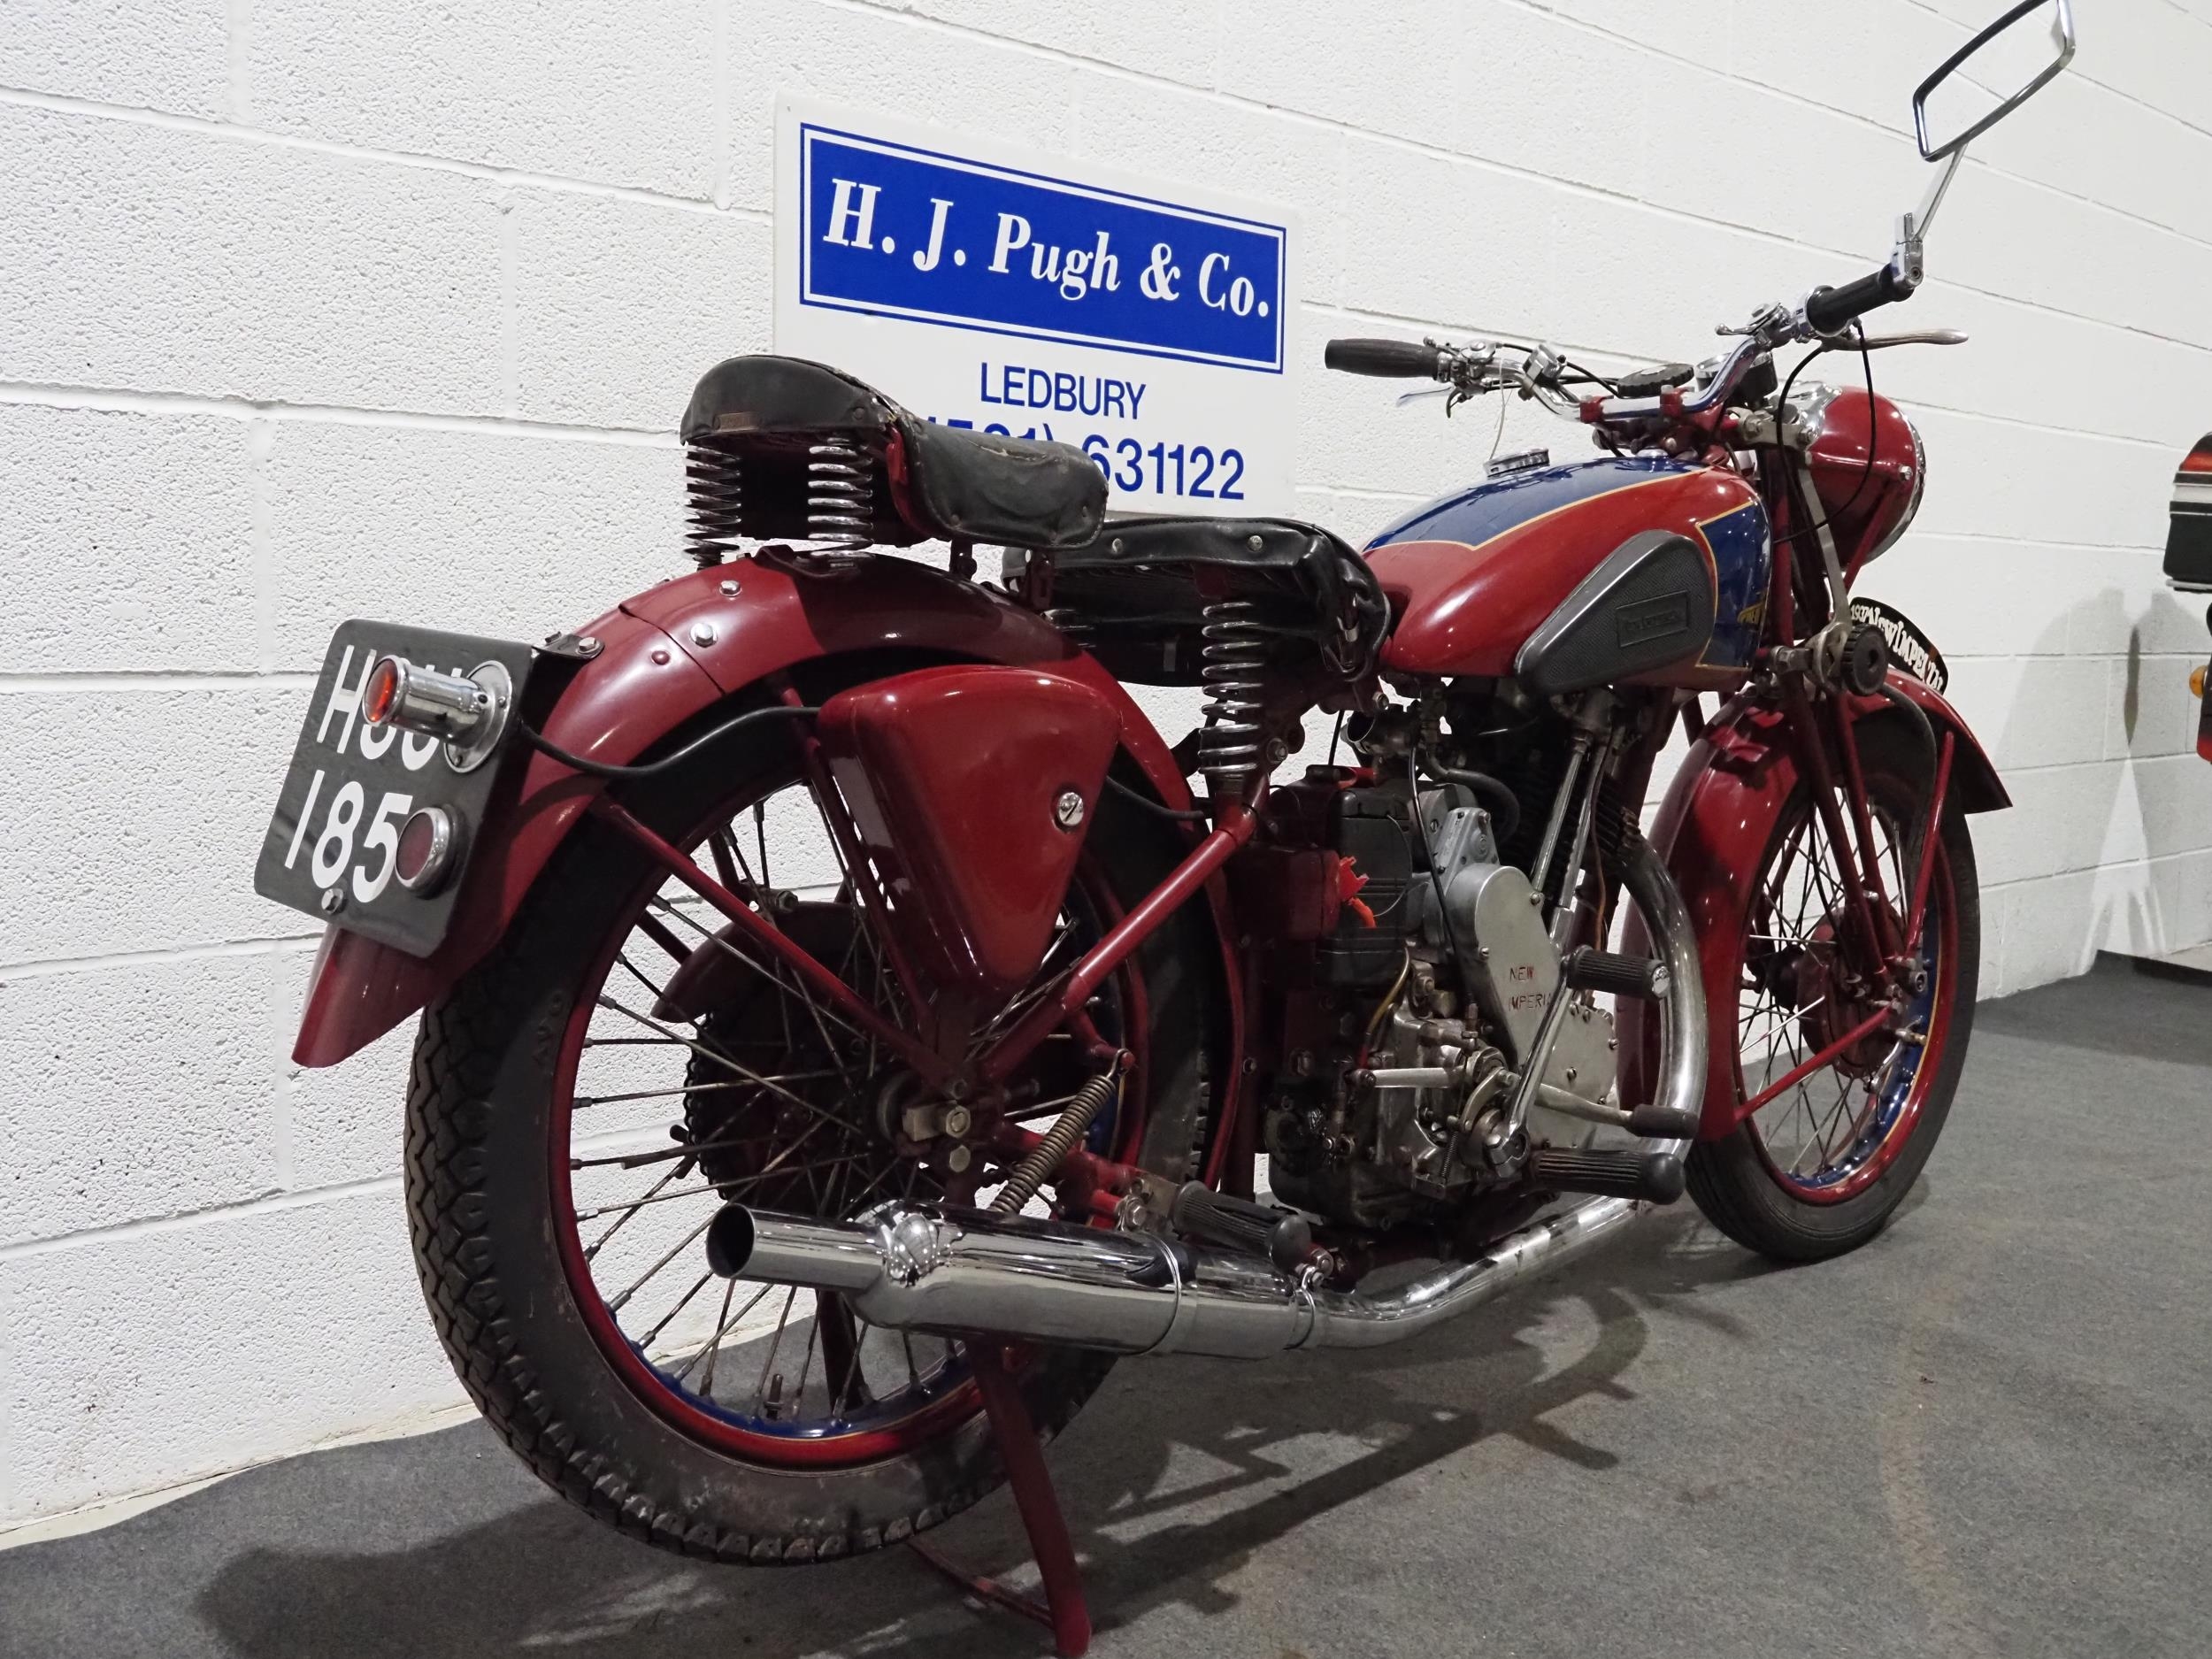 New Imperial 350 Model 46 motorcycle. 1937-8. 350cc. Frame No. 117/35821/R Engine No. 117-43721-46 - Image 4 of 7